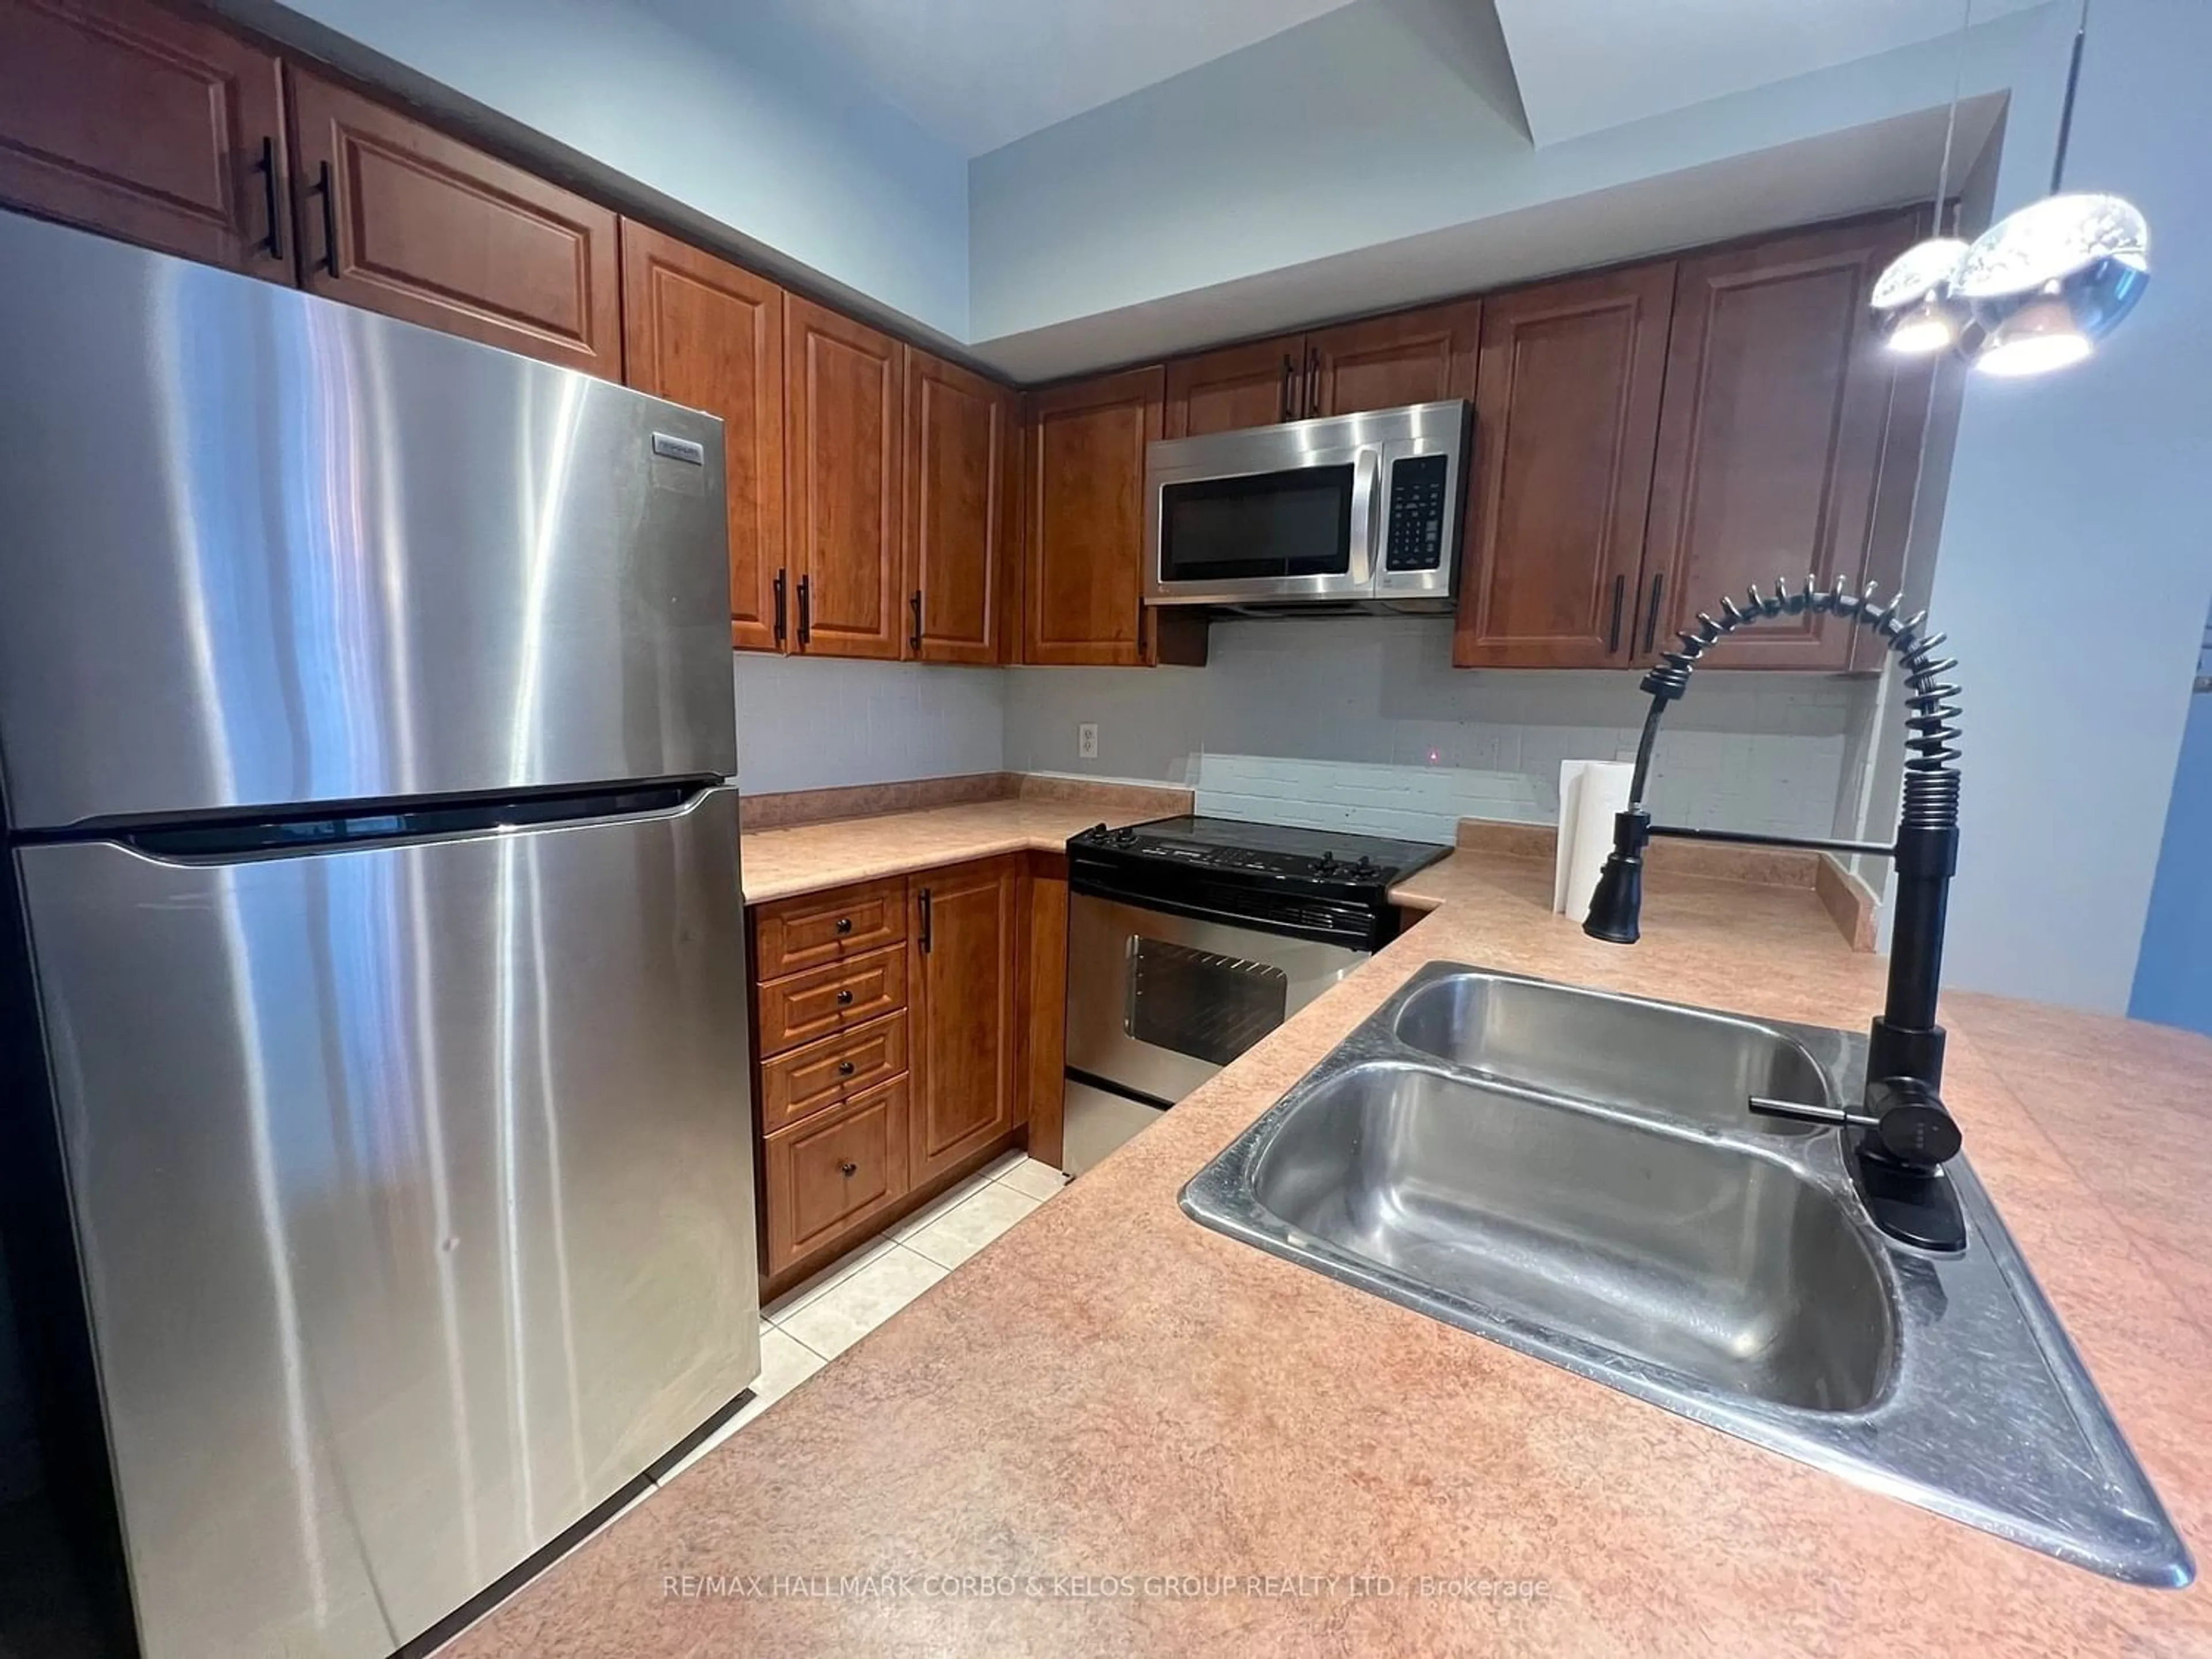 Standard kitchen for 3047 Finch Ave #1022, Toronto Ontario M9M 0A5